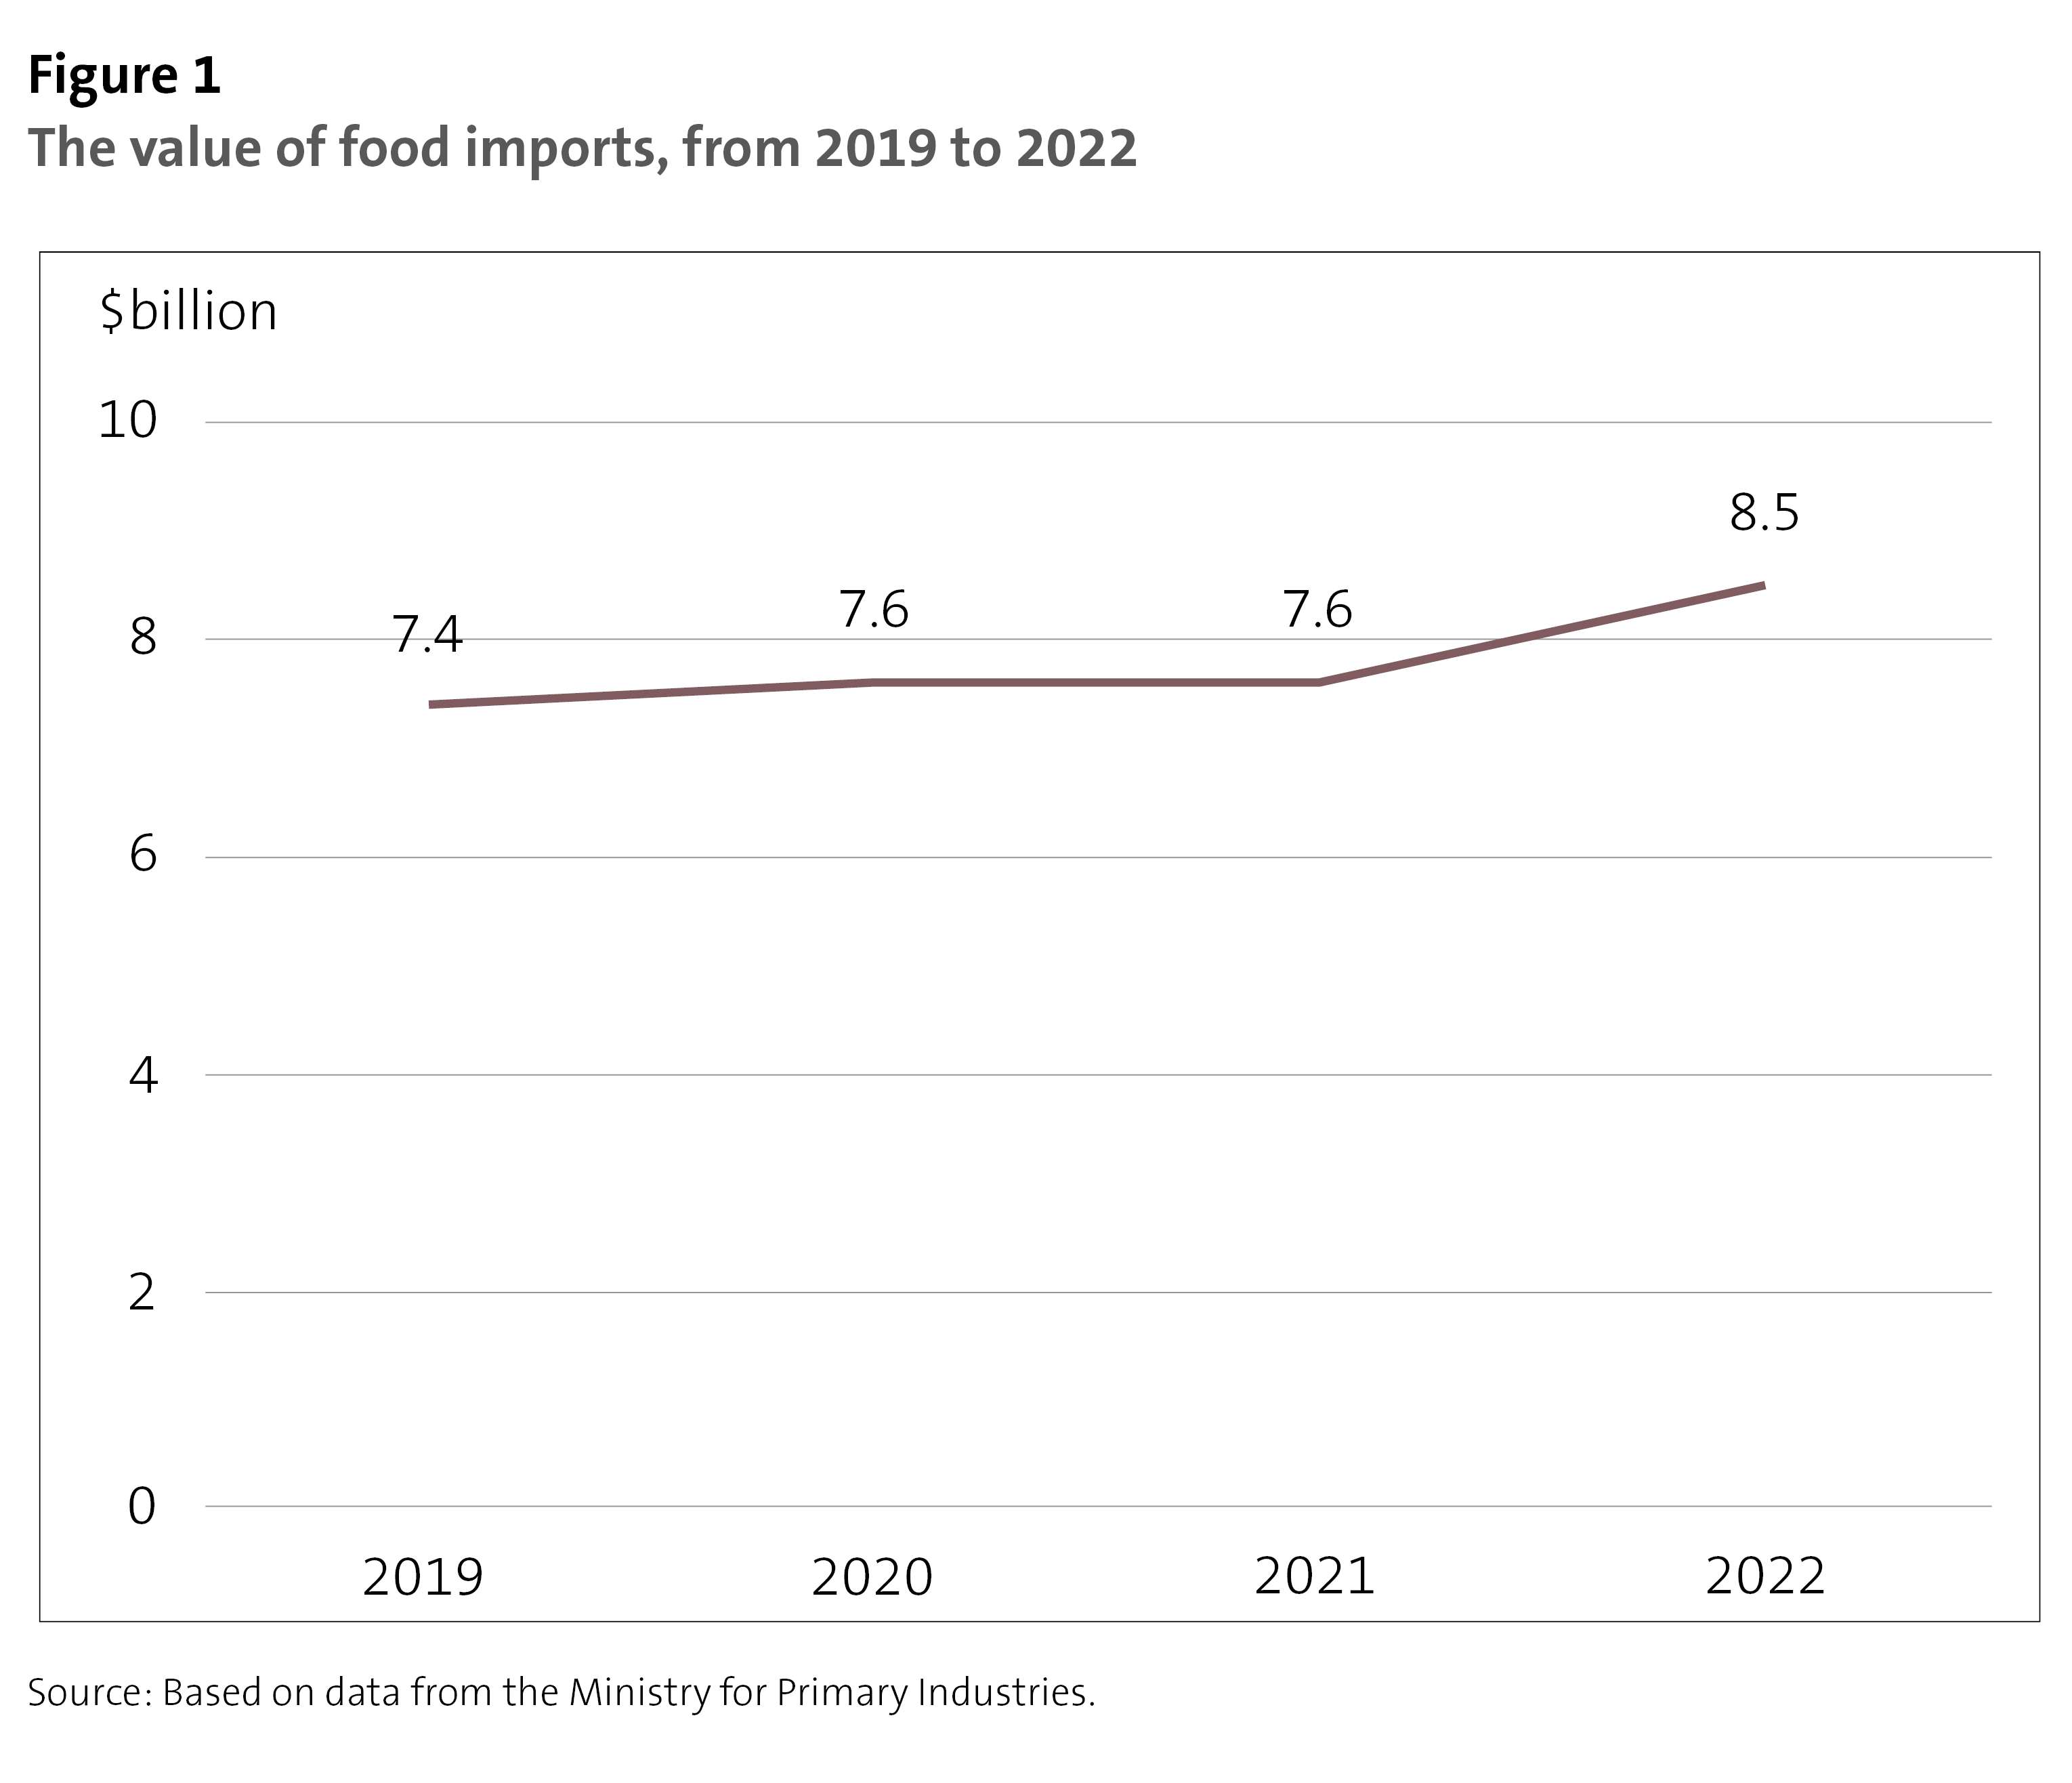 Figure 1: The value of food imports, from 2019 to 2022